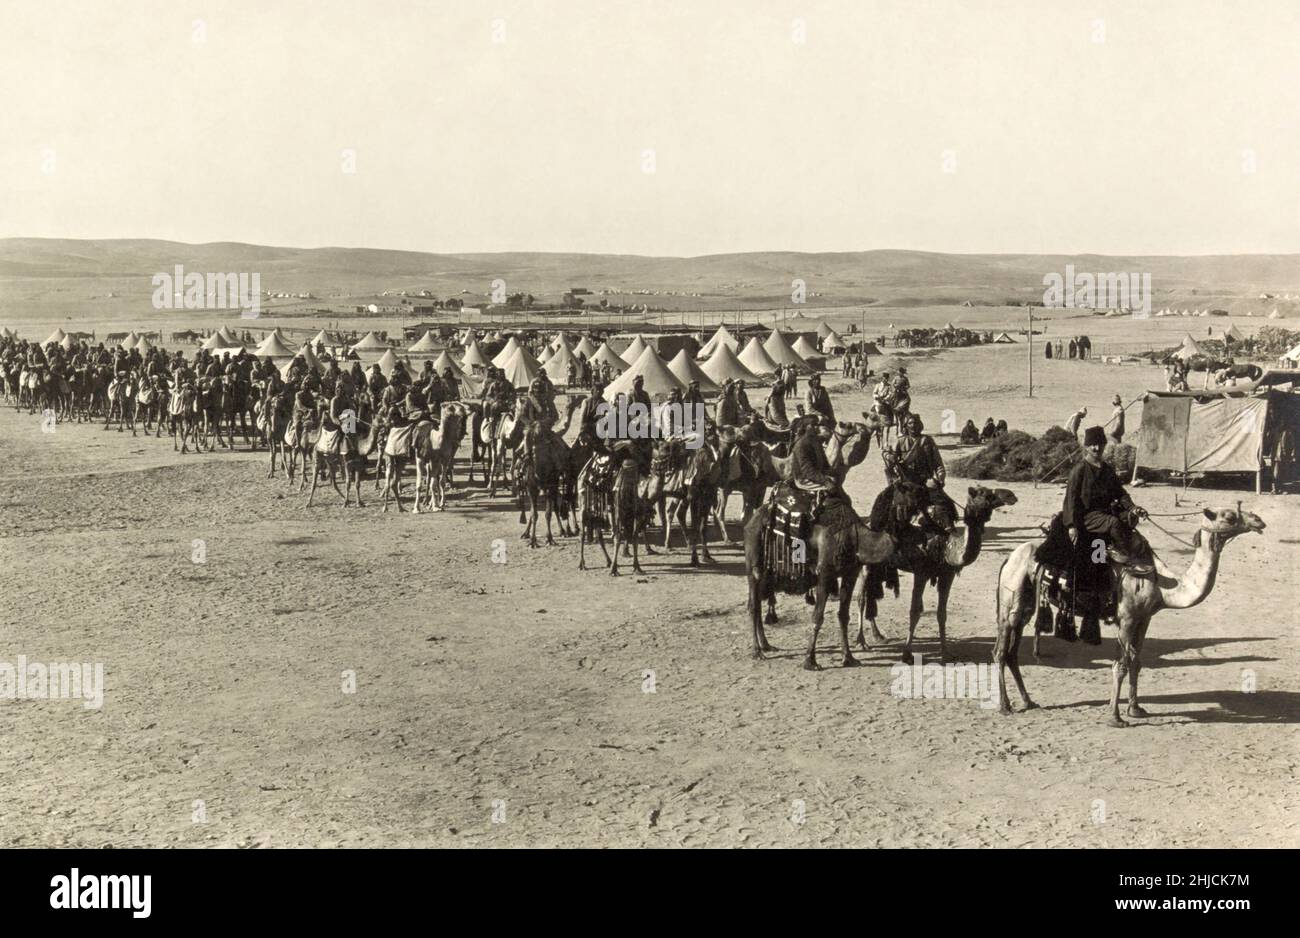 Ottoman camel riders of the 1st Hecins√ºvar Regiment, which took part in First Suez Offensive before the establishing of the Hejaz Expeditionary Force, which was one of the expeditionary forces of the military of the Ottoman Empire. Beersheba is the largest city in the Negev desert. First World War, 1915. Stock Photo